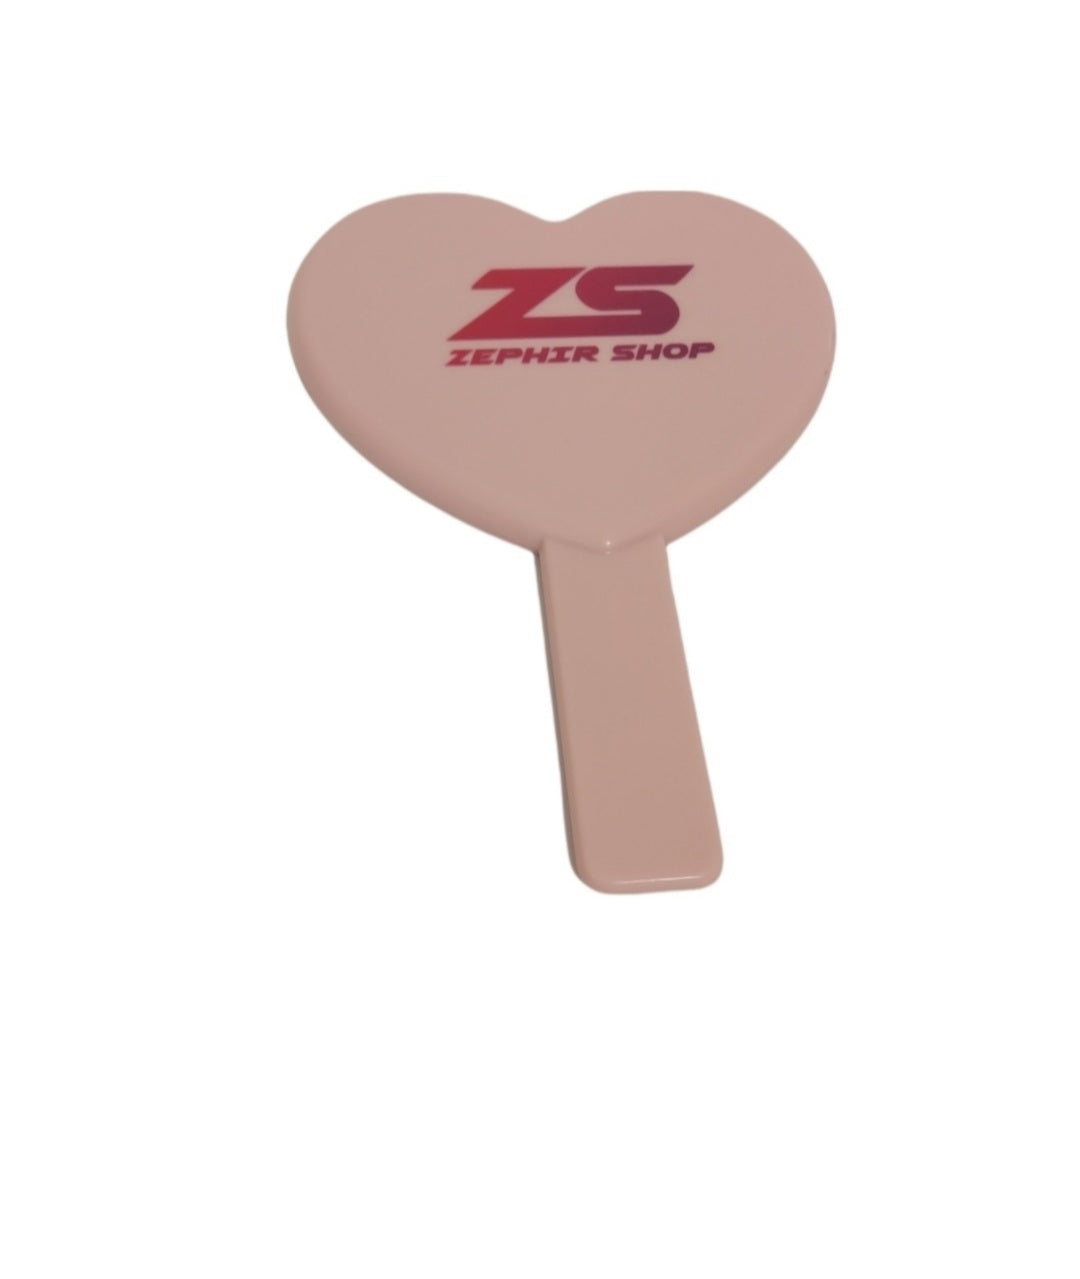 Heart Shaped Handheld mirror Cosmetic Make up Mirror With Handled